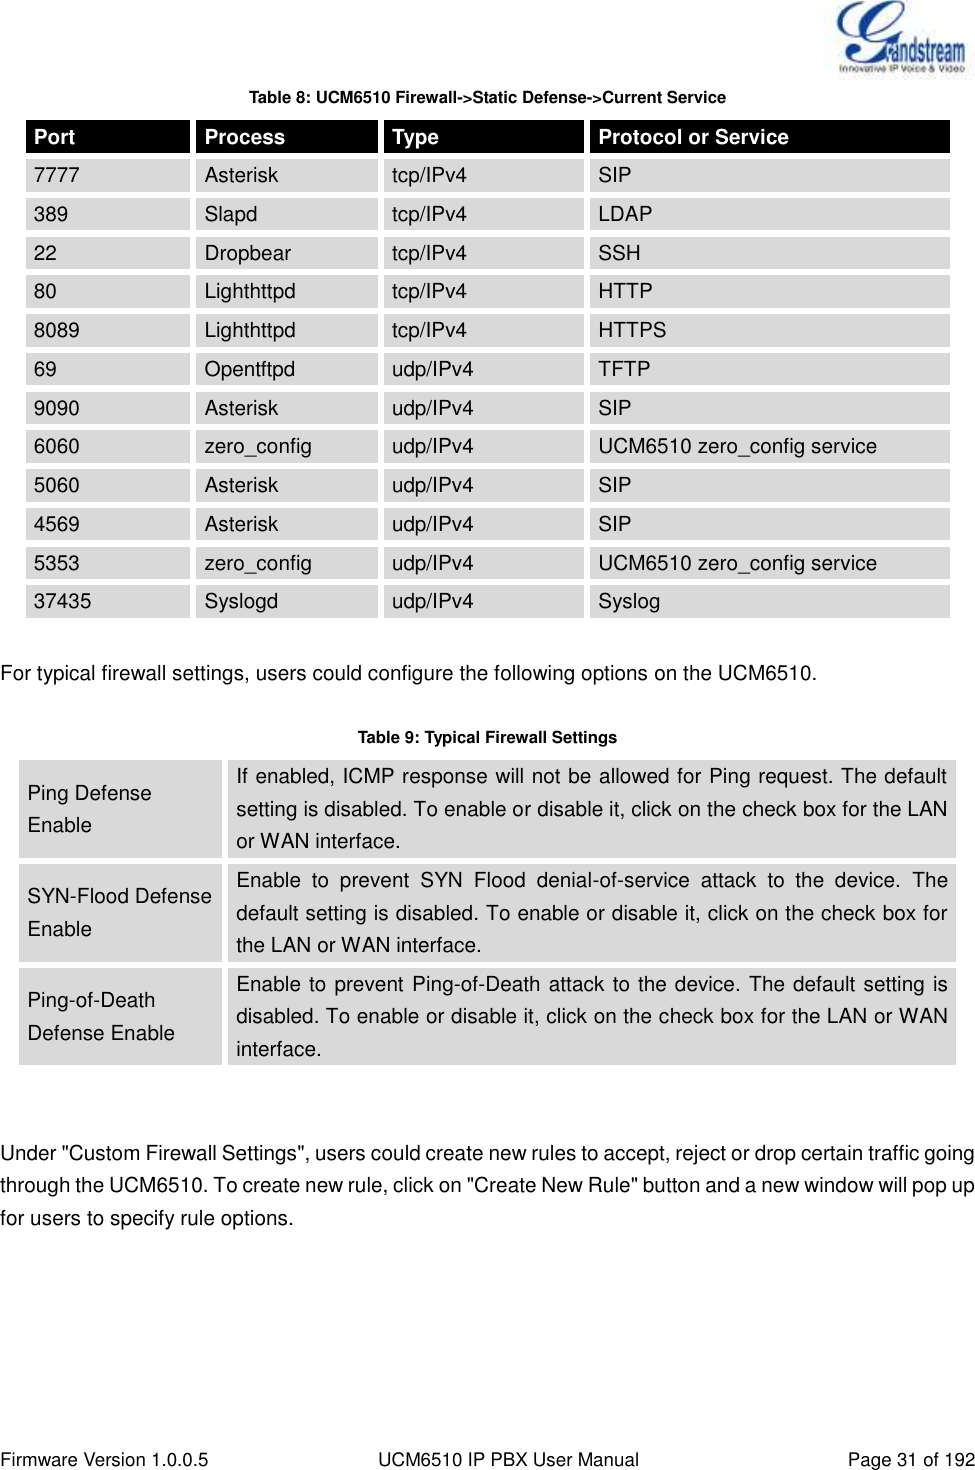  Firmware Version 1.0.0.5 UCM6510 IP PBX User Manual Page 31 of 192  Table 8: UCM6510 Firewall-&gt;Static Defense-&gt;Current Service Port Process Type Protocol or Service 7777 Asterisk tcp/IPv4 SIP 389 Slapd tcp/IPv4 LDAP 22 Dropbear tcp/IPv4 SSH 80 Lighthttpd tcp/IPv4 HTTP 8089 Lighthttpd tcp/IPv4 HTTPS 69 Opentftpd udp/IPv4 TFTP 9090 Asterisk udp/IPv4 SIP 6060 zero_config udp/IPv4 UCM6510 zero_config service 5060 Asterisk udp/IPv4 SIP 4569 Asterisk udp/IPv4 SIP 5353 zero_config udp/IPv4 UCM6510 zero_config service 37435 Syslogd udp/IPv4 Syslog  For typical firewall settings, users could configure the following options on the UCM6510.  Table 9: Typical Firewall Settings Ping Defense Enable If enabled, ICMP response will not be allowed for Ping request. The default setting is disabled. To enable or disable it, click on the check box for the LAN or WAN interface. SYN-Flood Defense Enable Enable  to  prevent  SYN  Flood  denial-of-service  attack  to  the  device.  The default setting is disabled. To enable or disable it, click on the check box for the LAN or WAN interface. Ping-of-Death Defense Enable Enable to prevent Ping-of-Death attack to the device. The default setting is disabled. To enable or disable it, click on the check box for the LAN or WAN   interface.   Under &quot;Custom Firewall Settings&quot;, users could create new rules to accept, reject or drop certain traffic going through the UCM6510. To create new rule, click on &quot;Create New Rule&quot; button and a new window will pop up for users to specify rule options.  